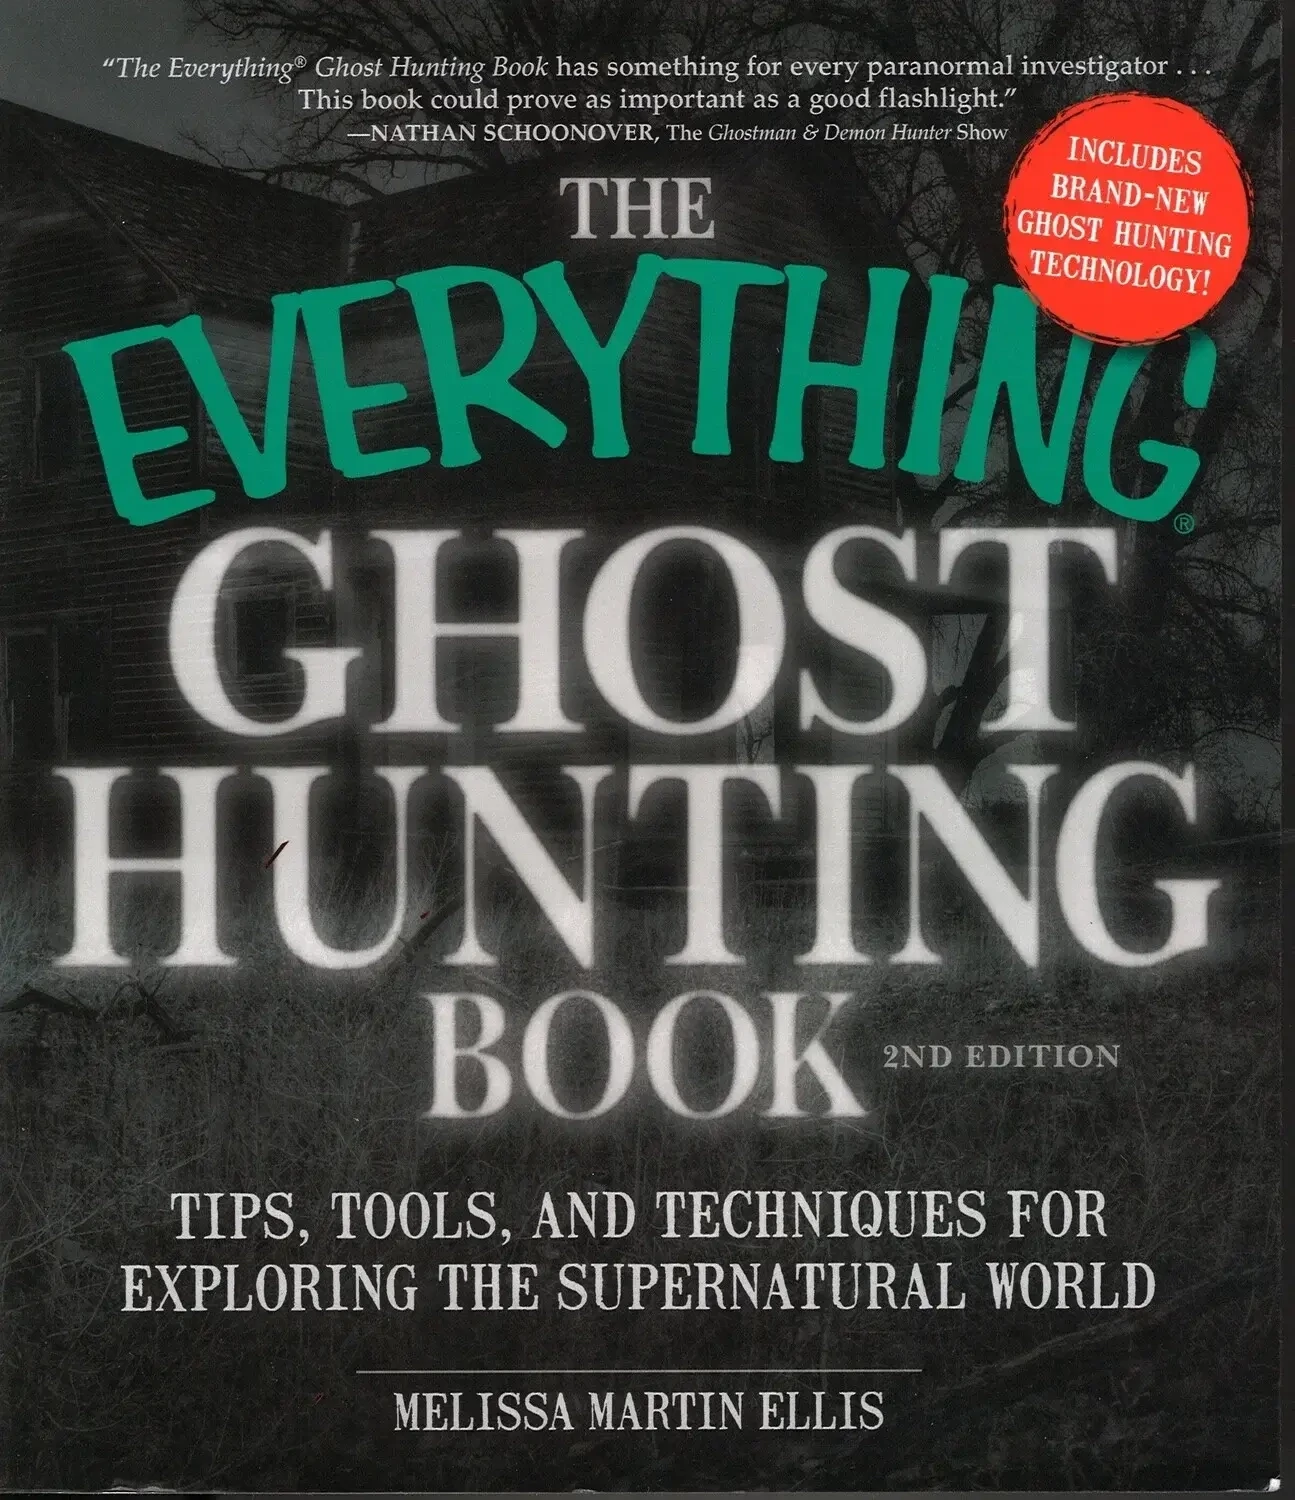 The Everything Ghost Hunting Book (2nd Edition), Melissa Martin Ellis